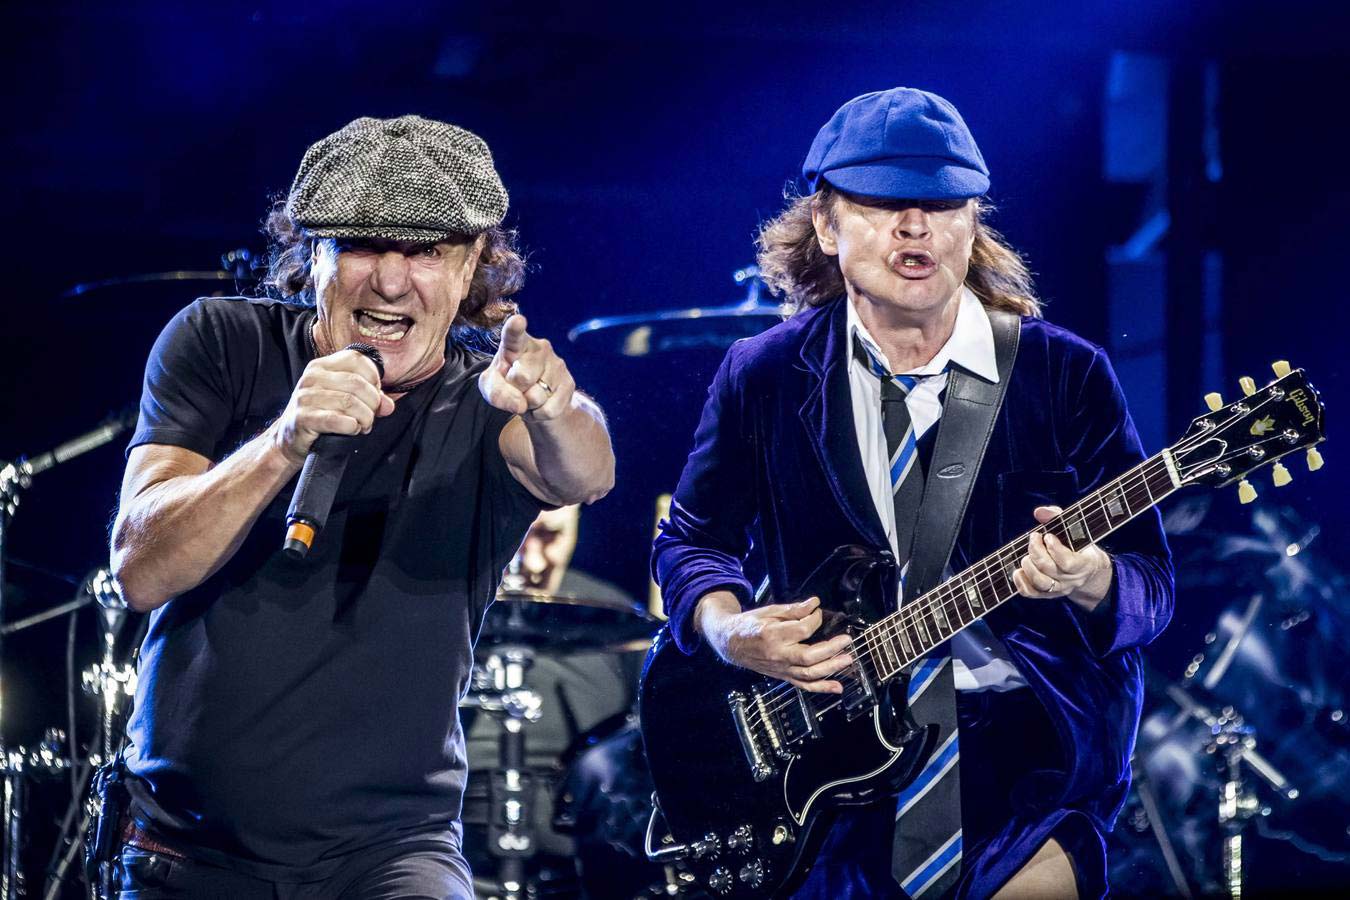 Brian Johnson e Angus Young. Turnê Rock or Bust.